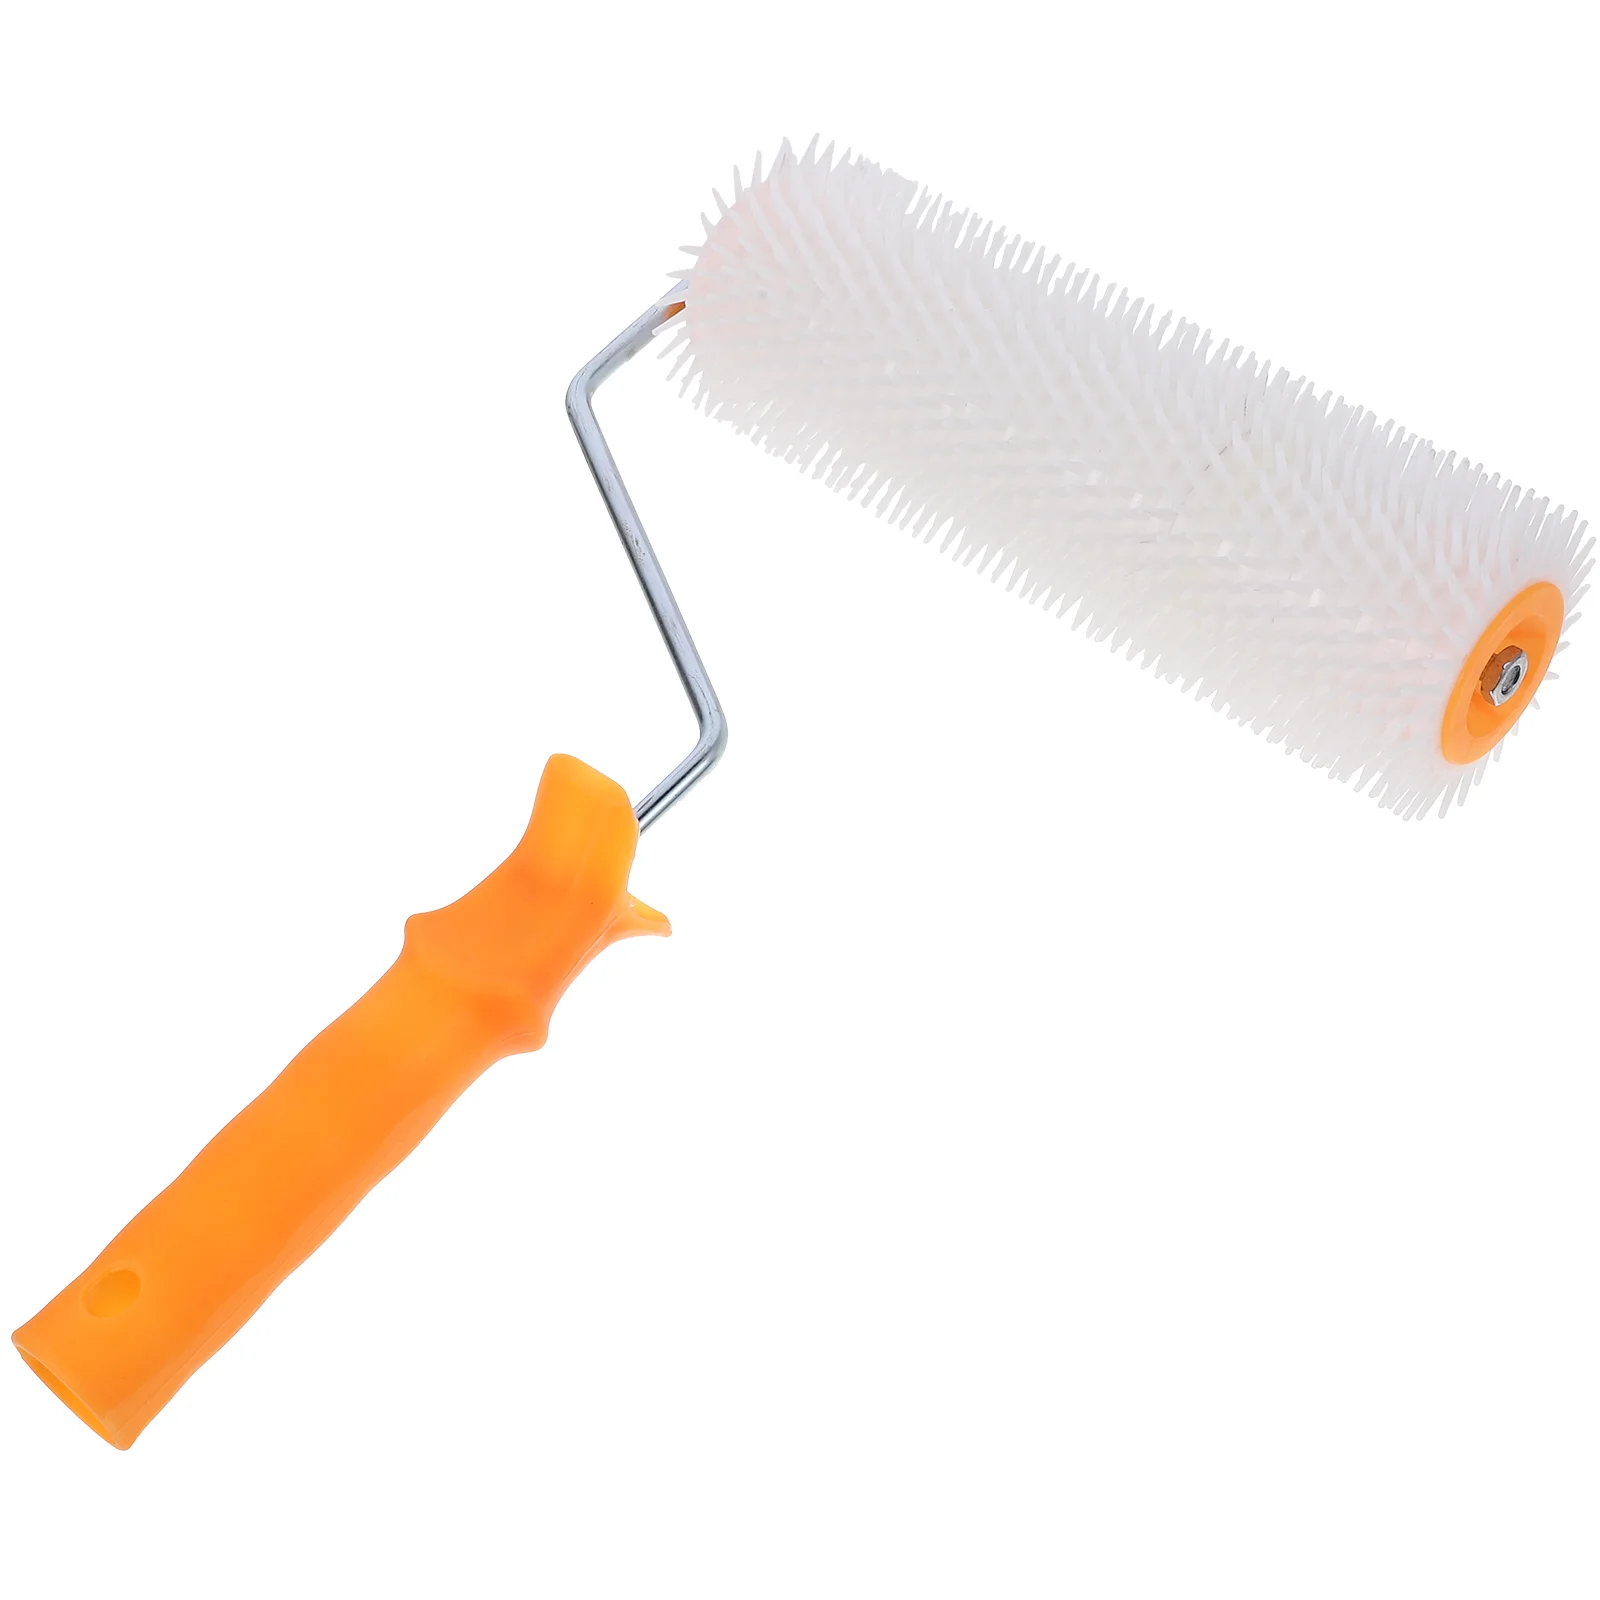 

Roller Brush Hand Squeegee Cement Floor Nail Foam Self Leveling Defoaming Flooring Tool Screed Spiked Screeding Silicone